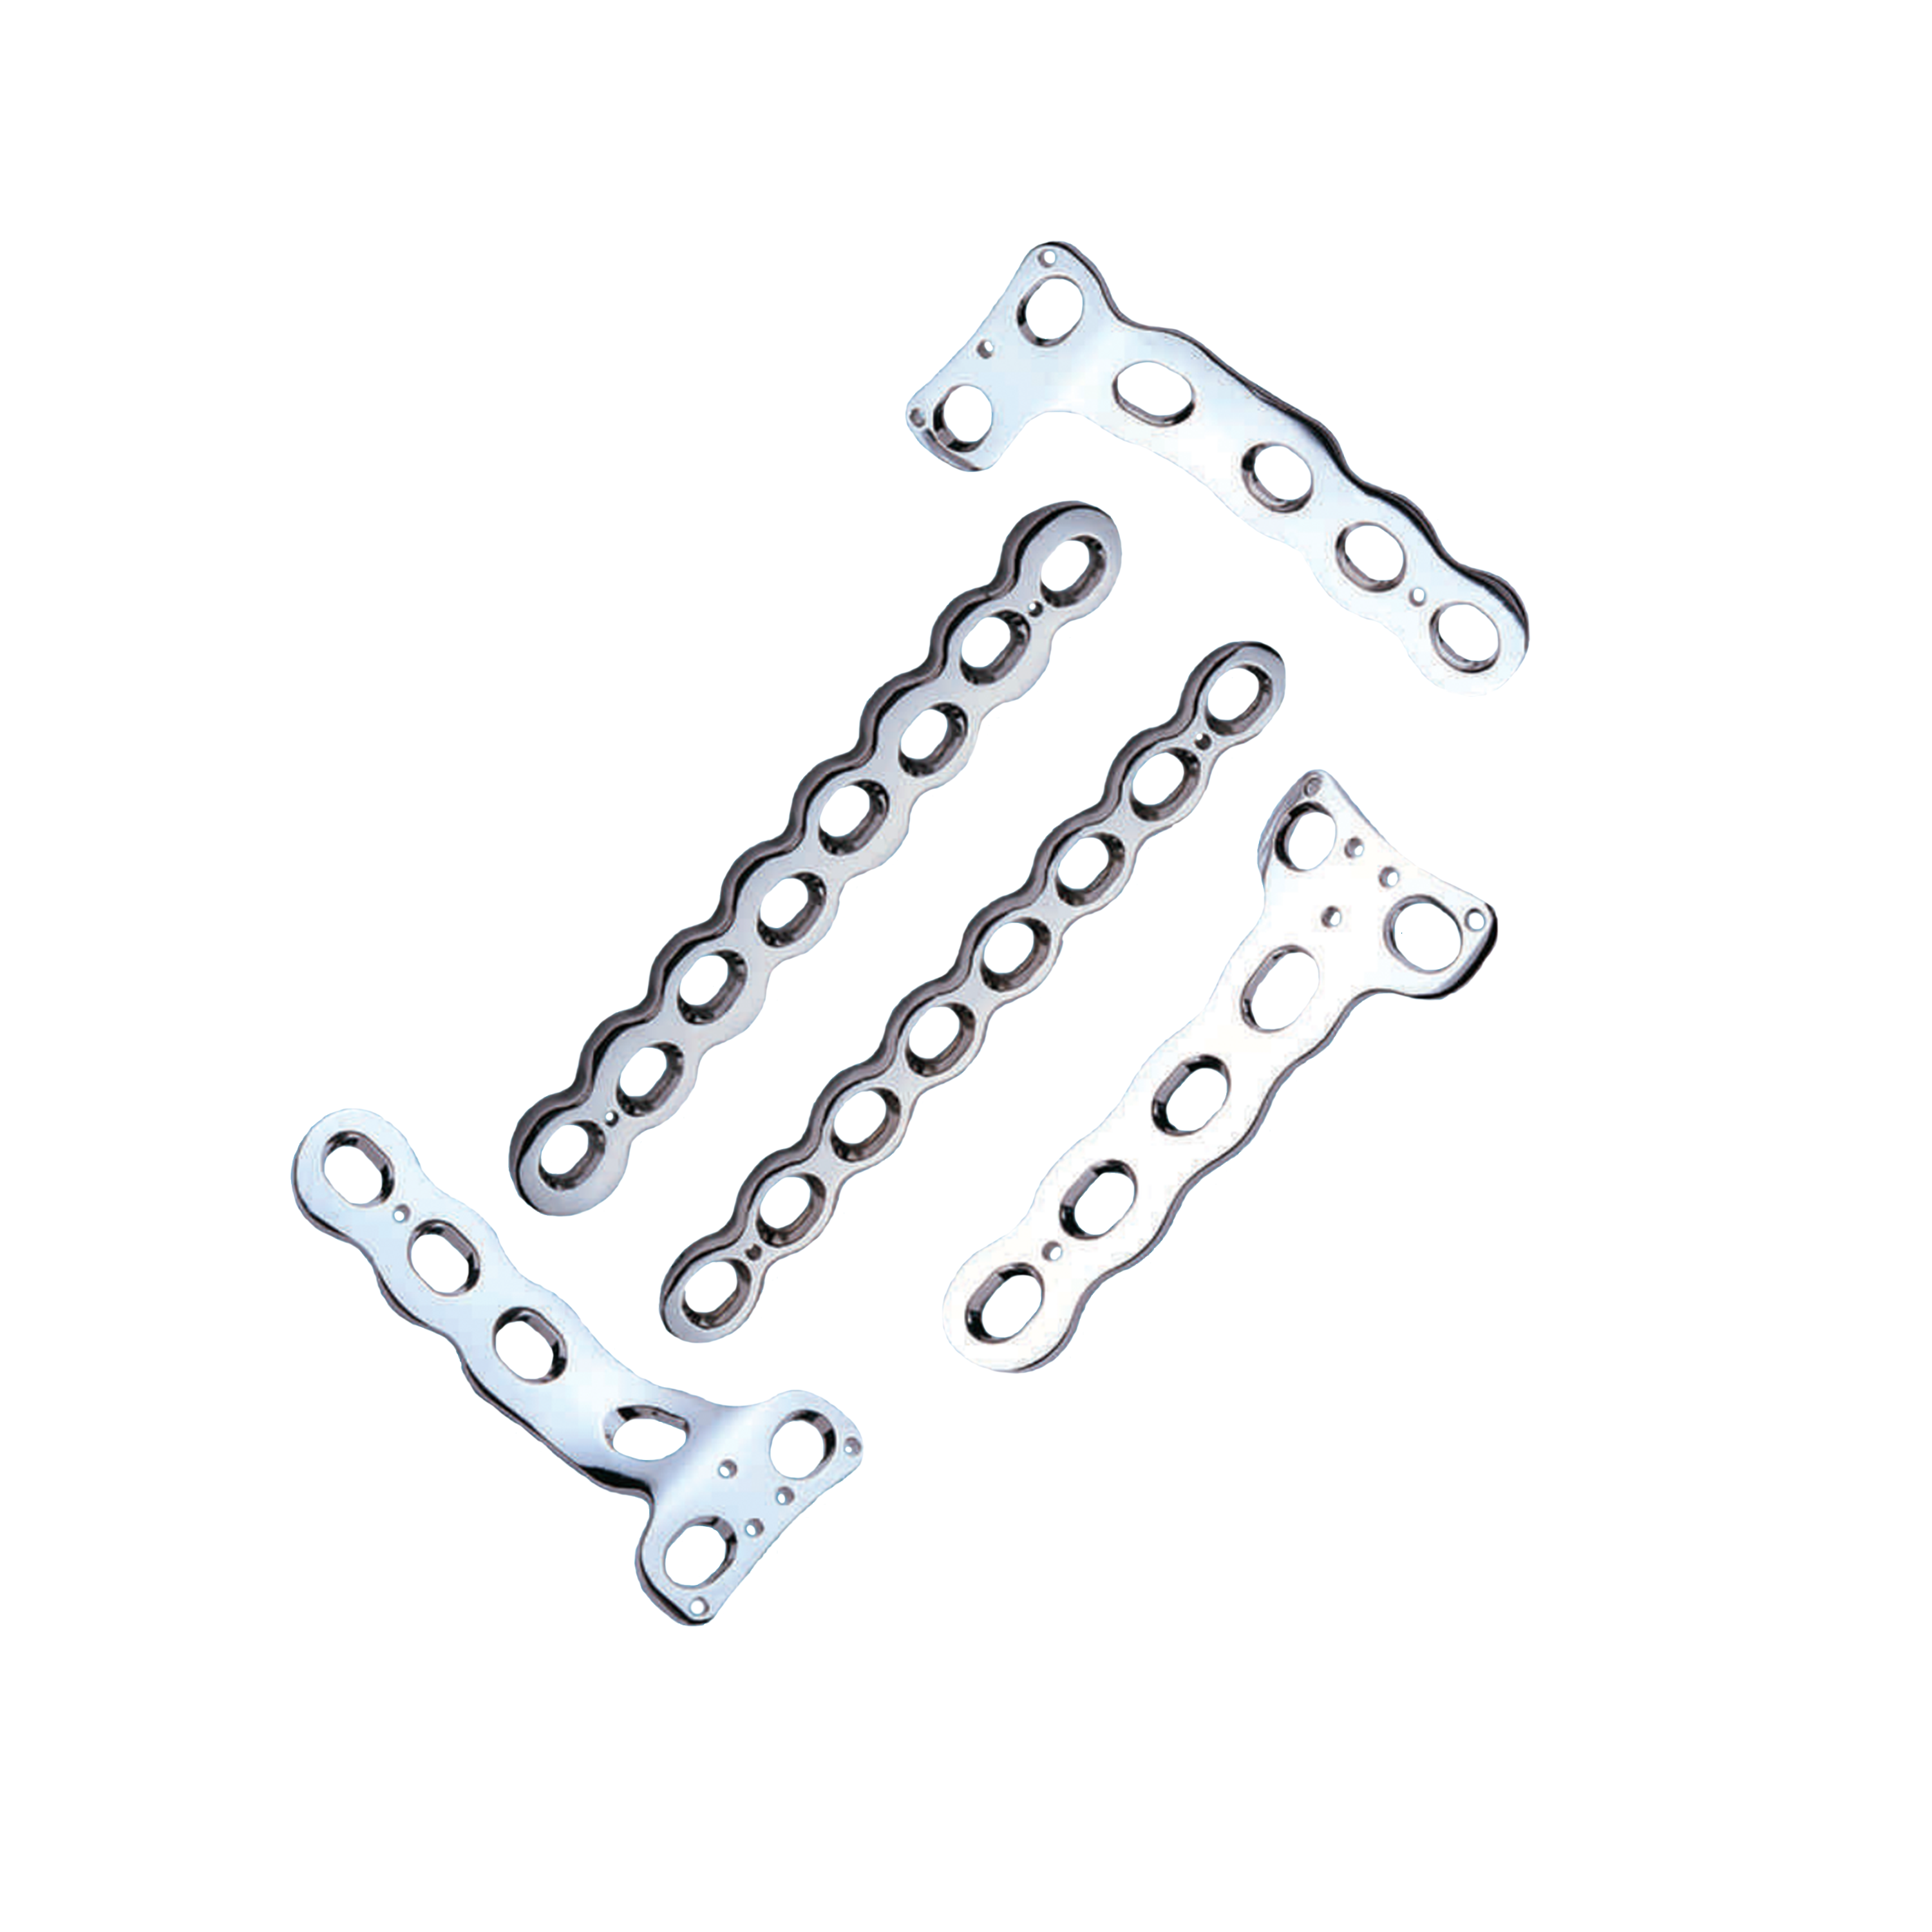 SPS Basic Fragment (Stainless Steel & Titanium) | The newly developed Basic Fragment Set is designed for the most common indications of traumatology and orthopaedics.